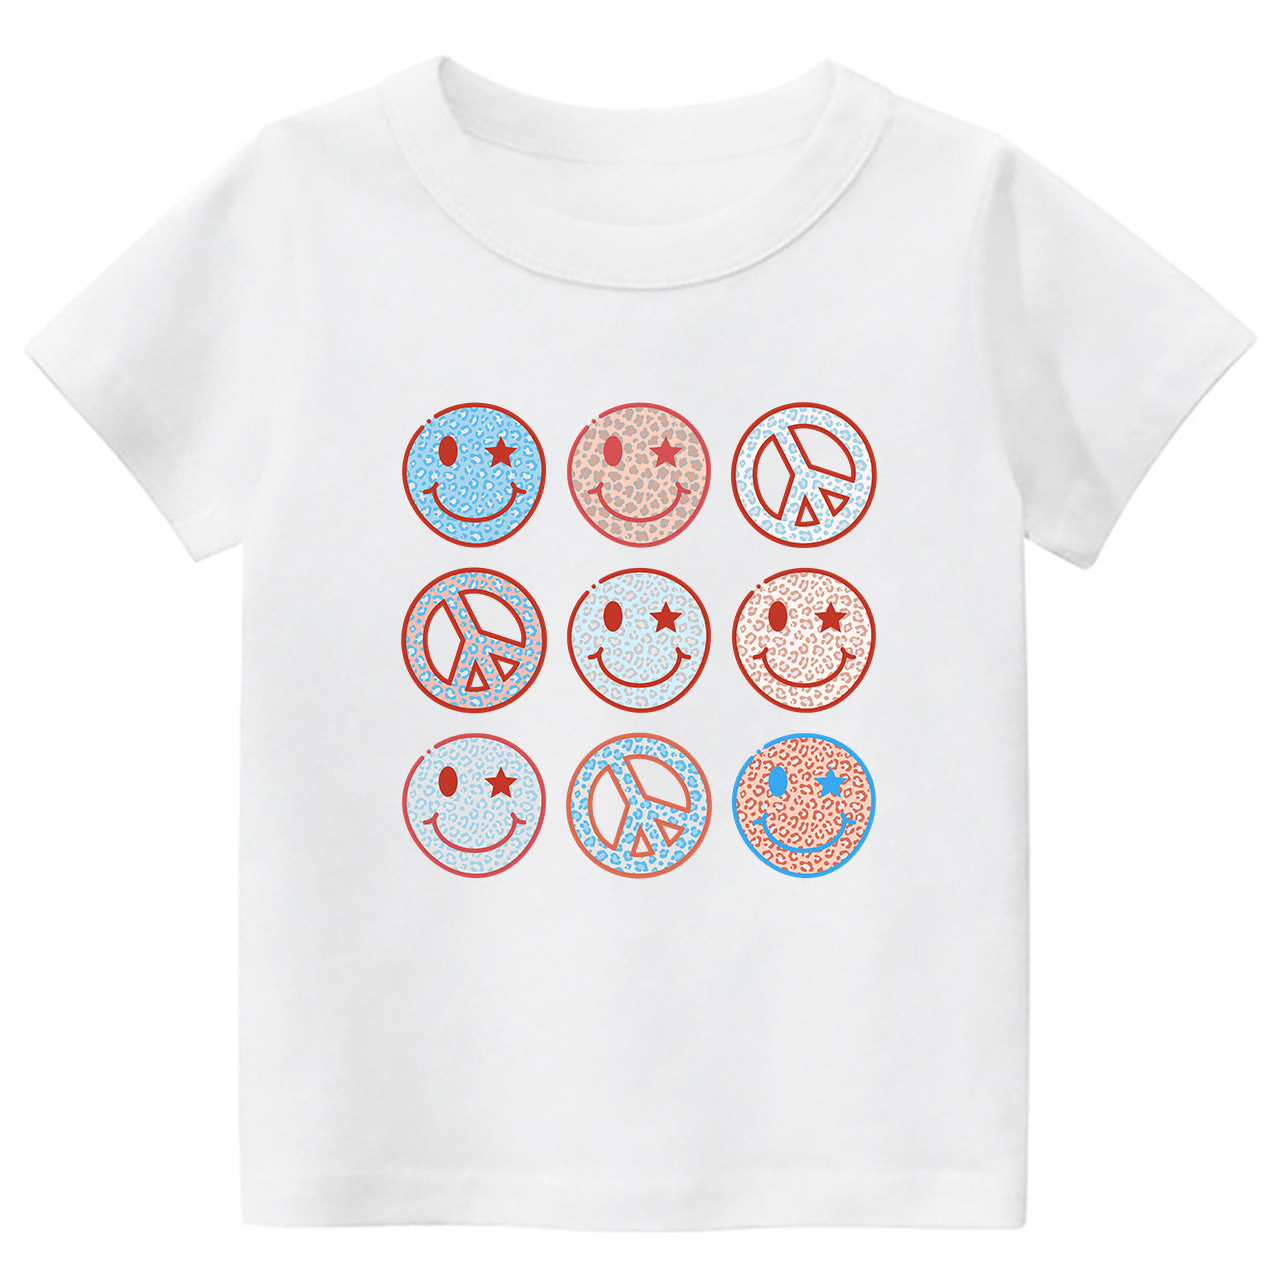 Independence Day Smiley Face Toddler Tees